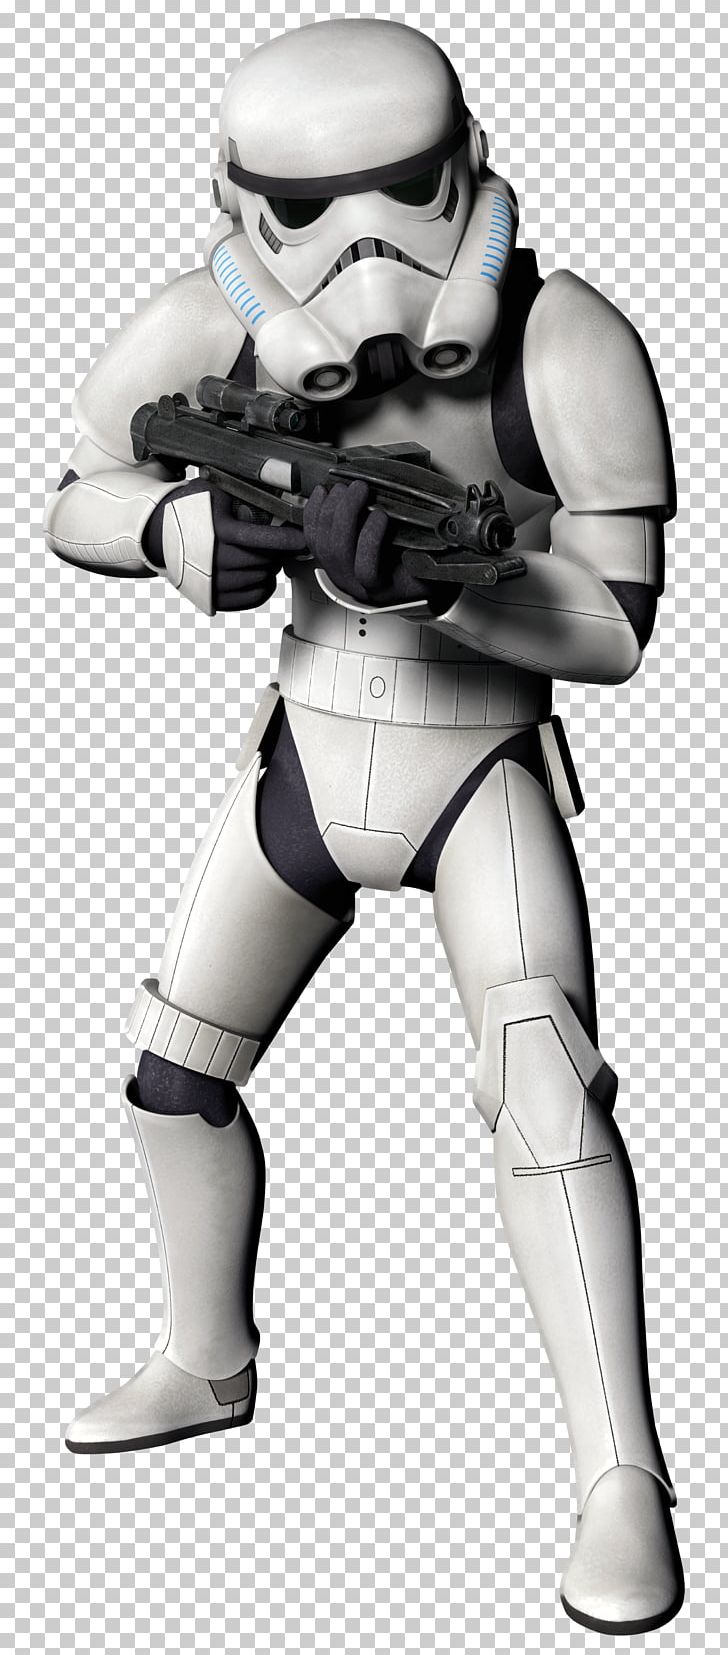 Luke Skywalker Stormtrooper Star Wars Wookieepedia Galactic Empire PNG, Clipart, Action Figure, Armour, Baseball Equipment, Fantasy, Fictional Character Free PNG Download